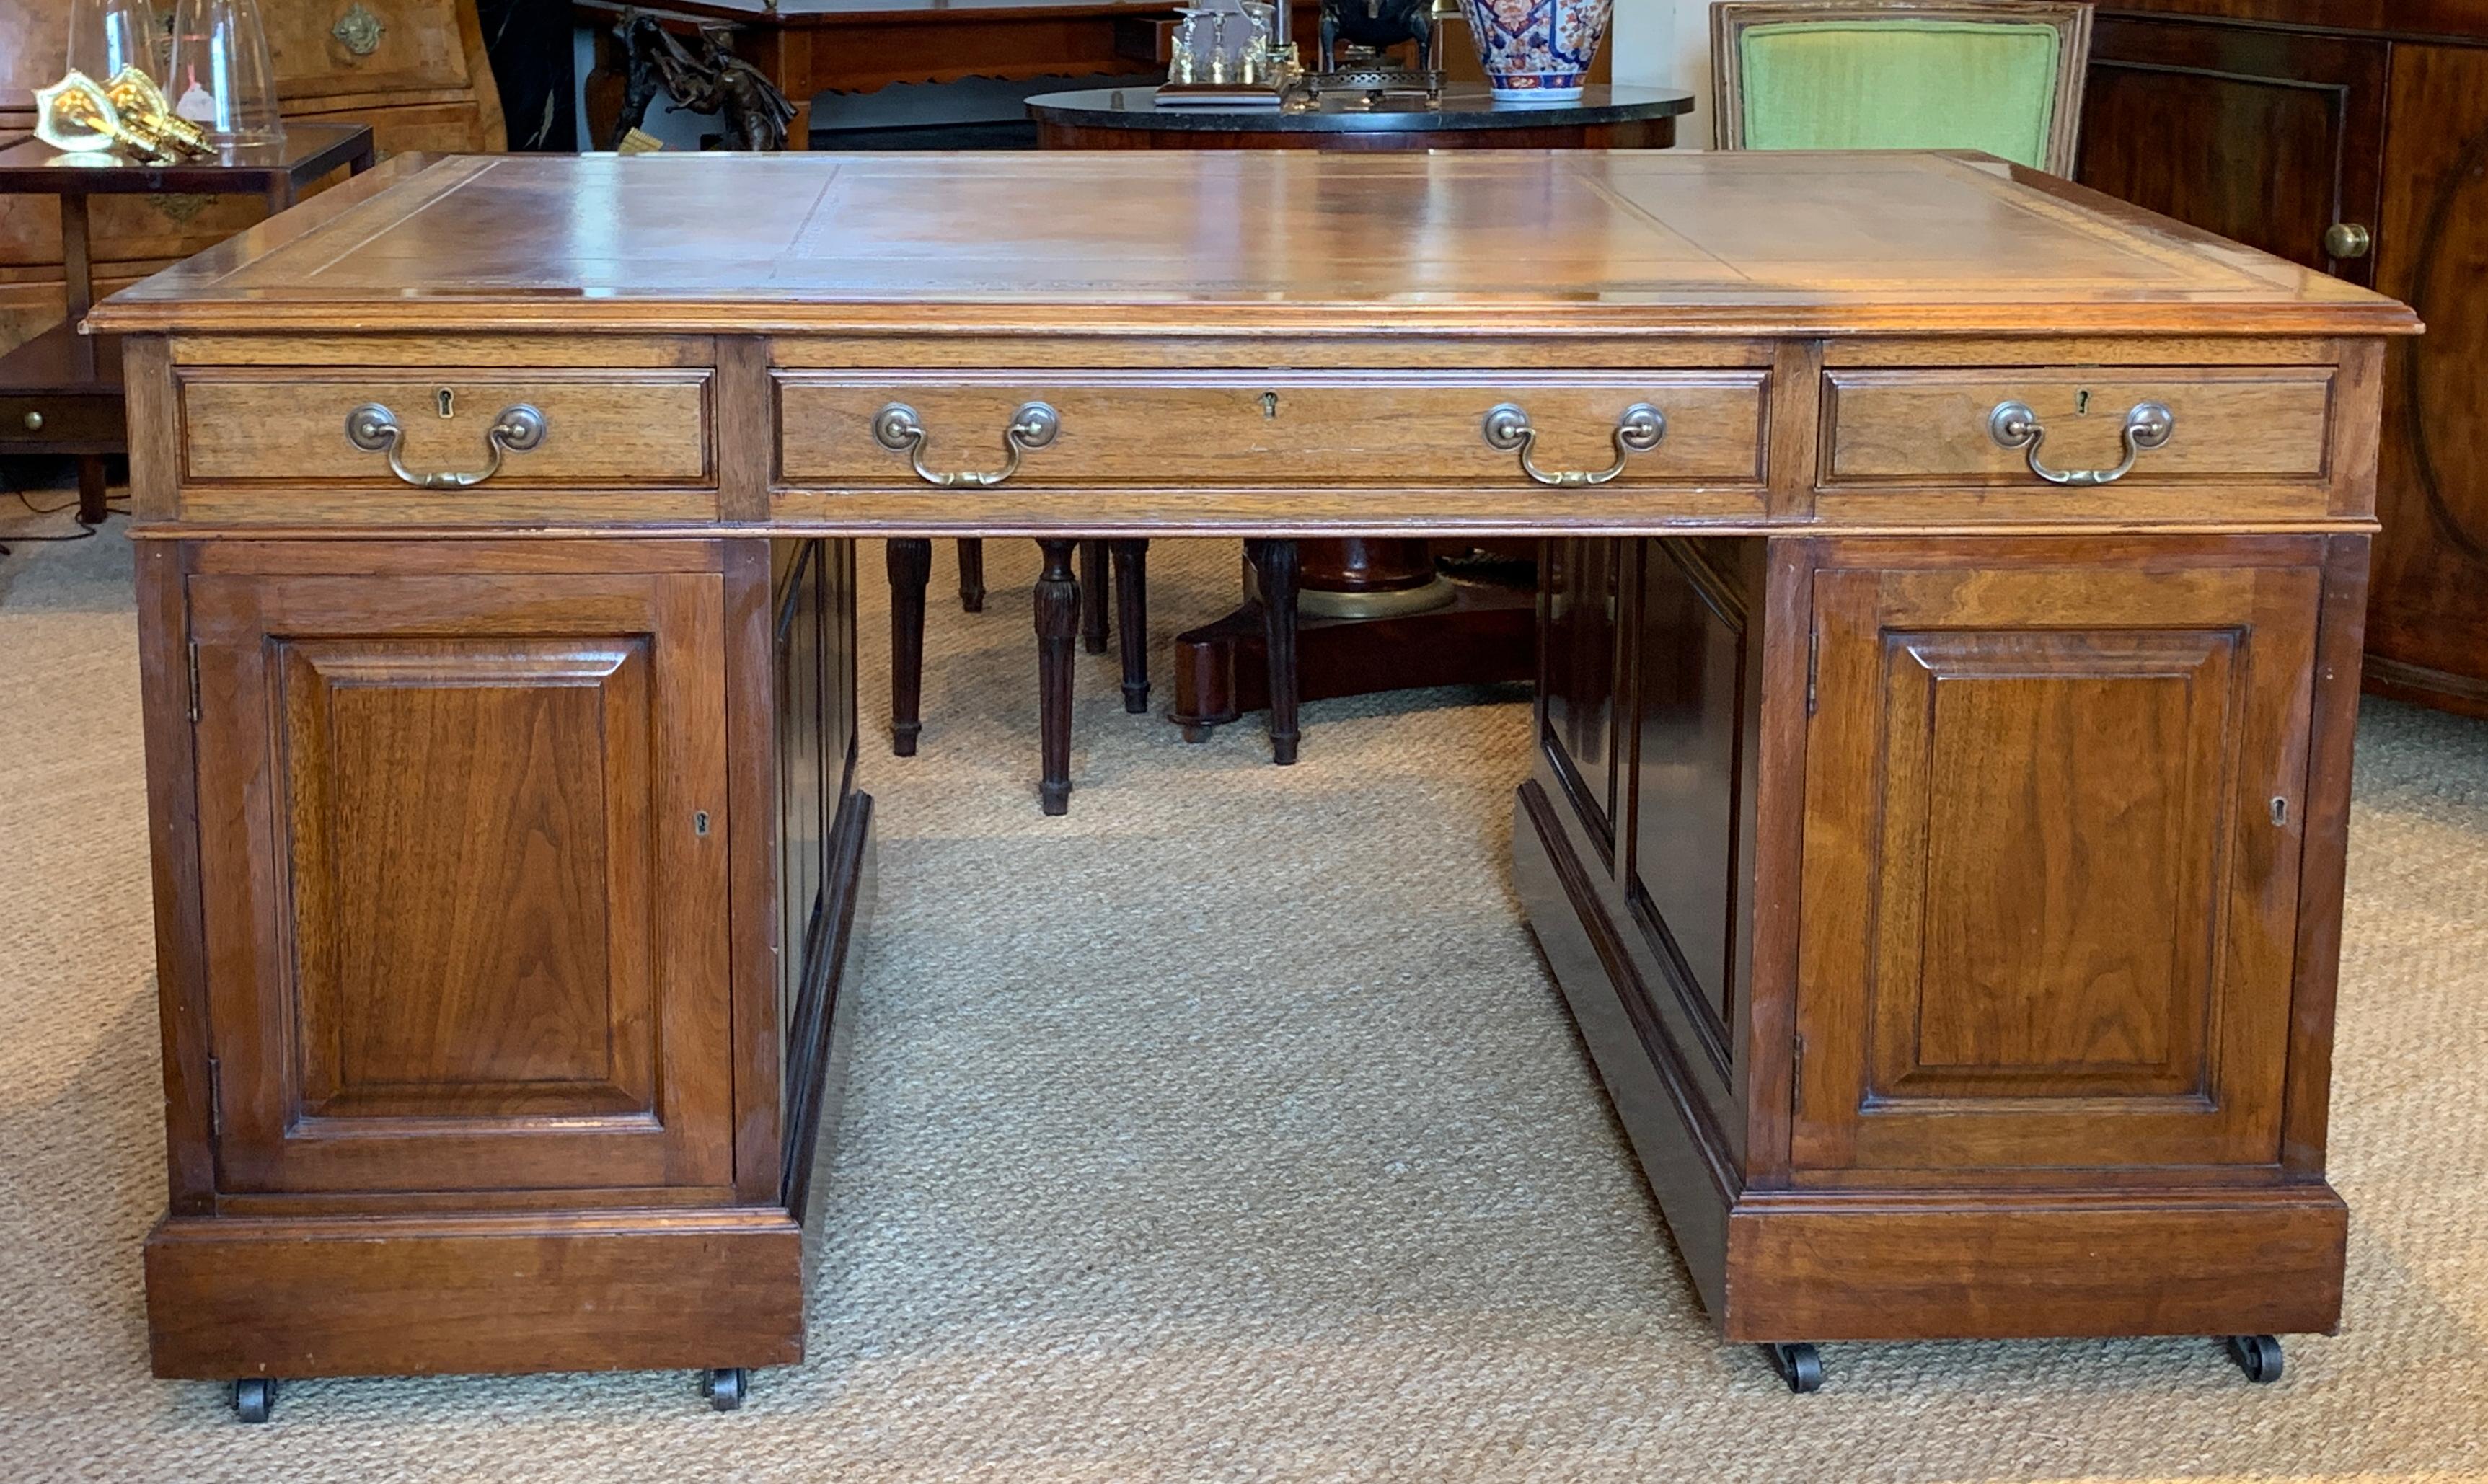 A magnificent early 20th century English mahogany and tooled leather topped partner’s desk by Hobbs and Co. with opposite facing cabinet and drawer pedestal bases on casters and two small and single larger drawers on both sides of the top.